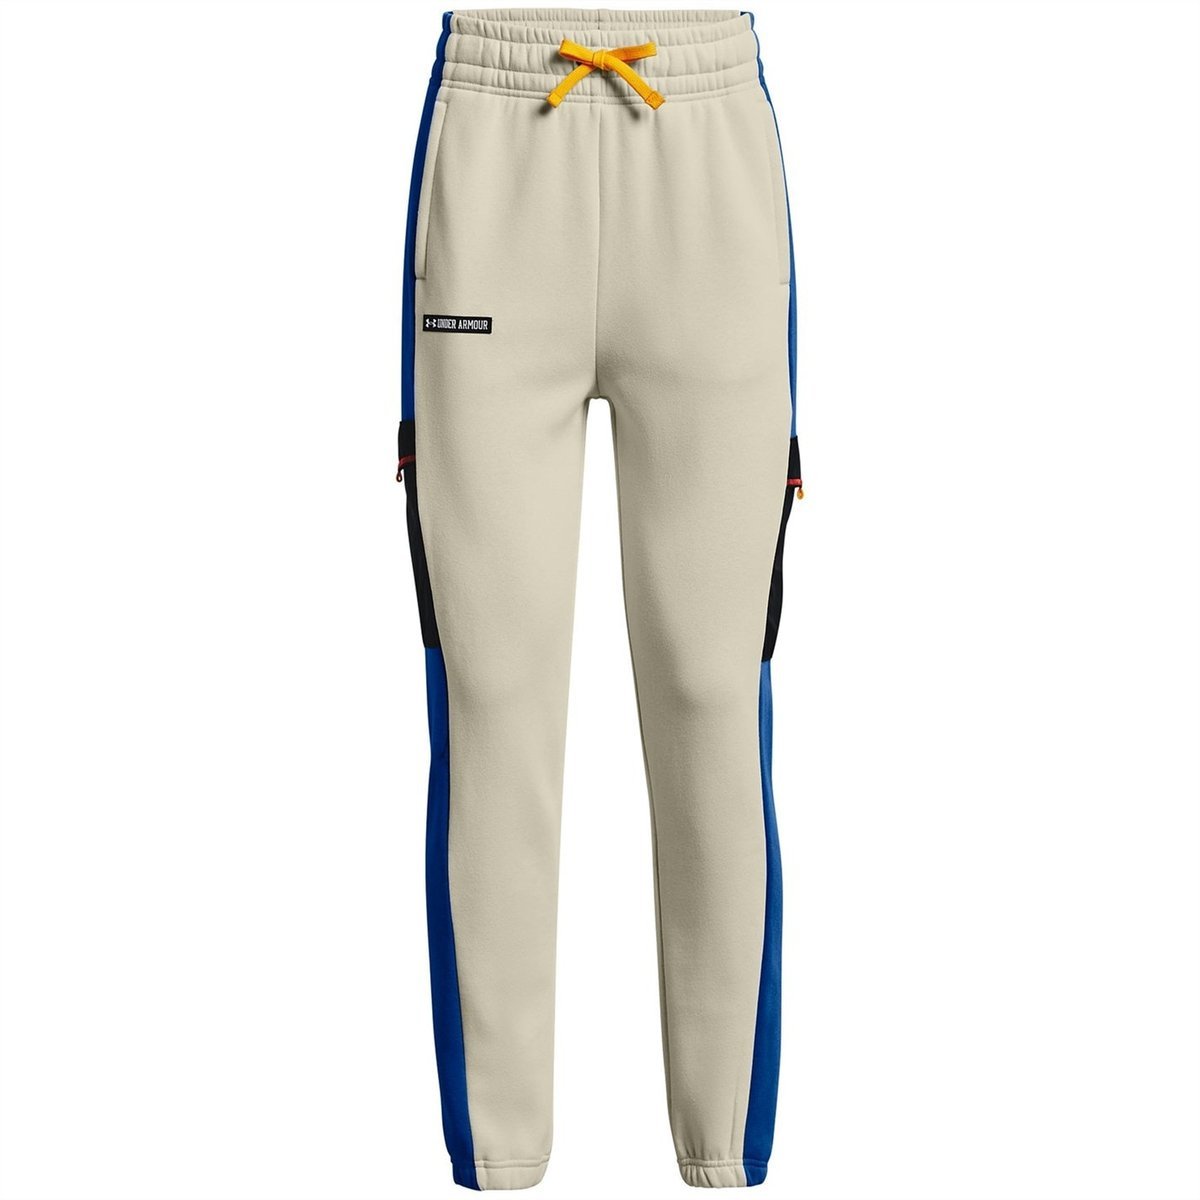  Under Armour - Womens Storm Outrun Cold Pant Pants